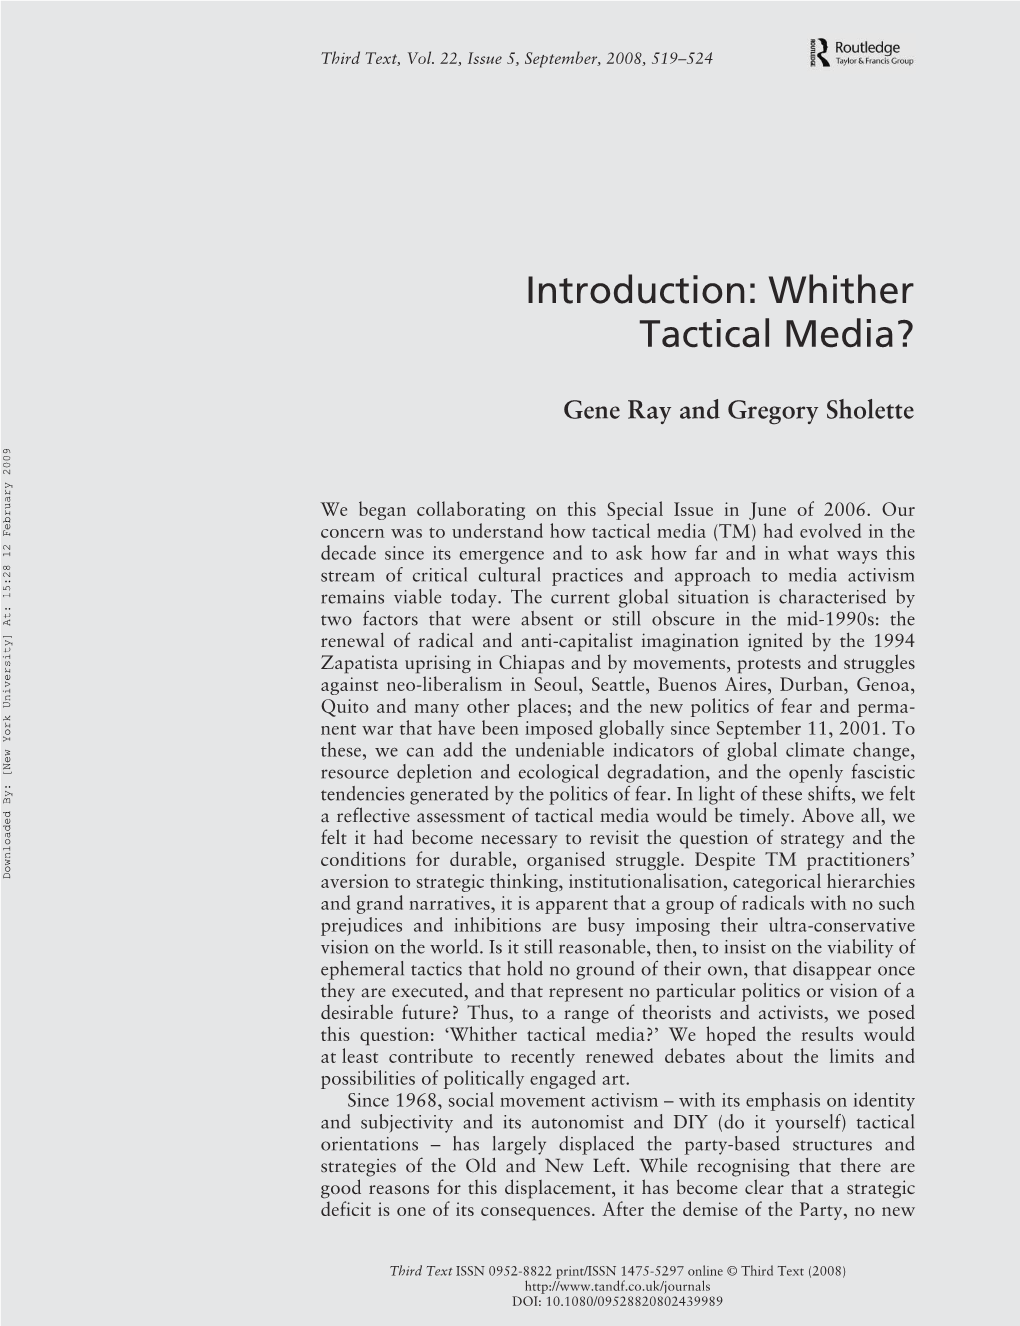 Whither Tactical Media?